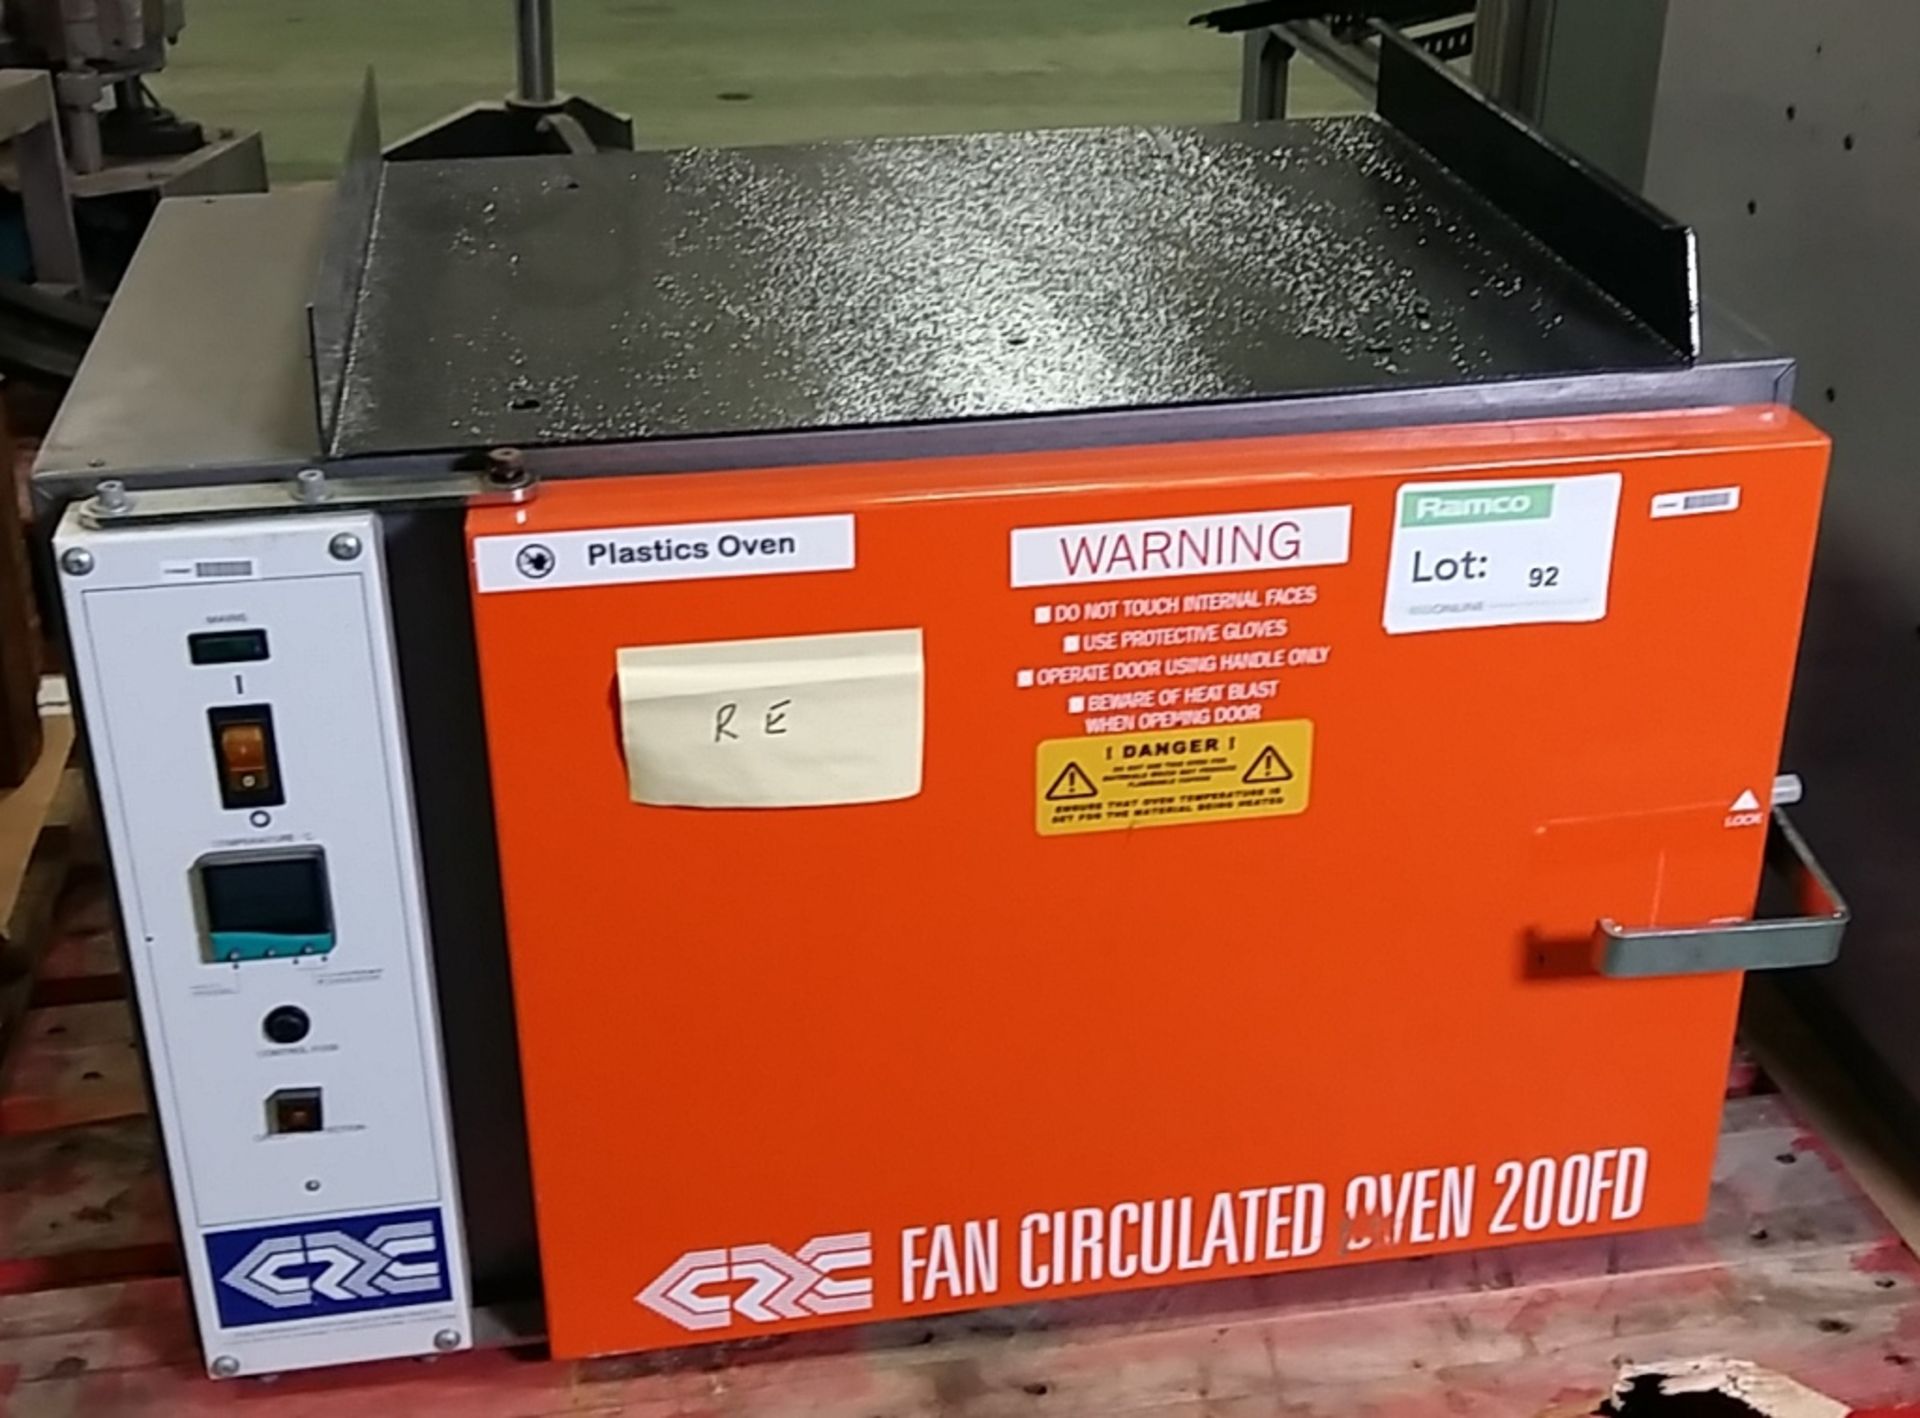 CRC fan circulated oven 200FD